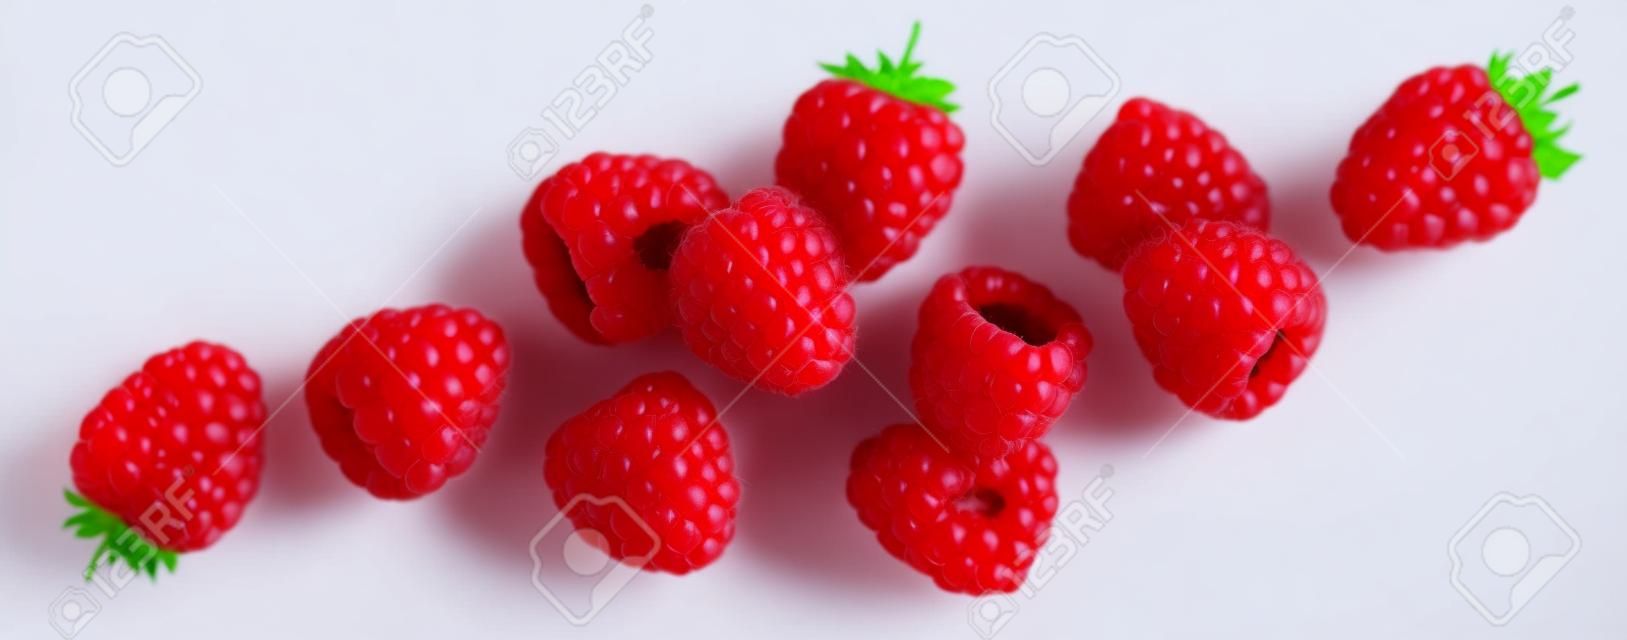 Raspberry isolated on white background, falling raspberries, collection